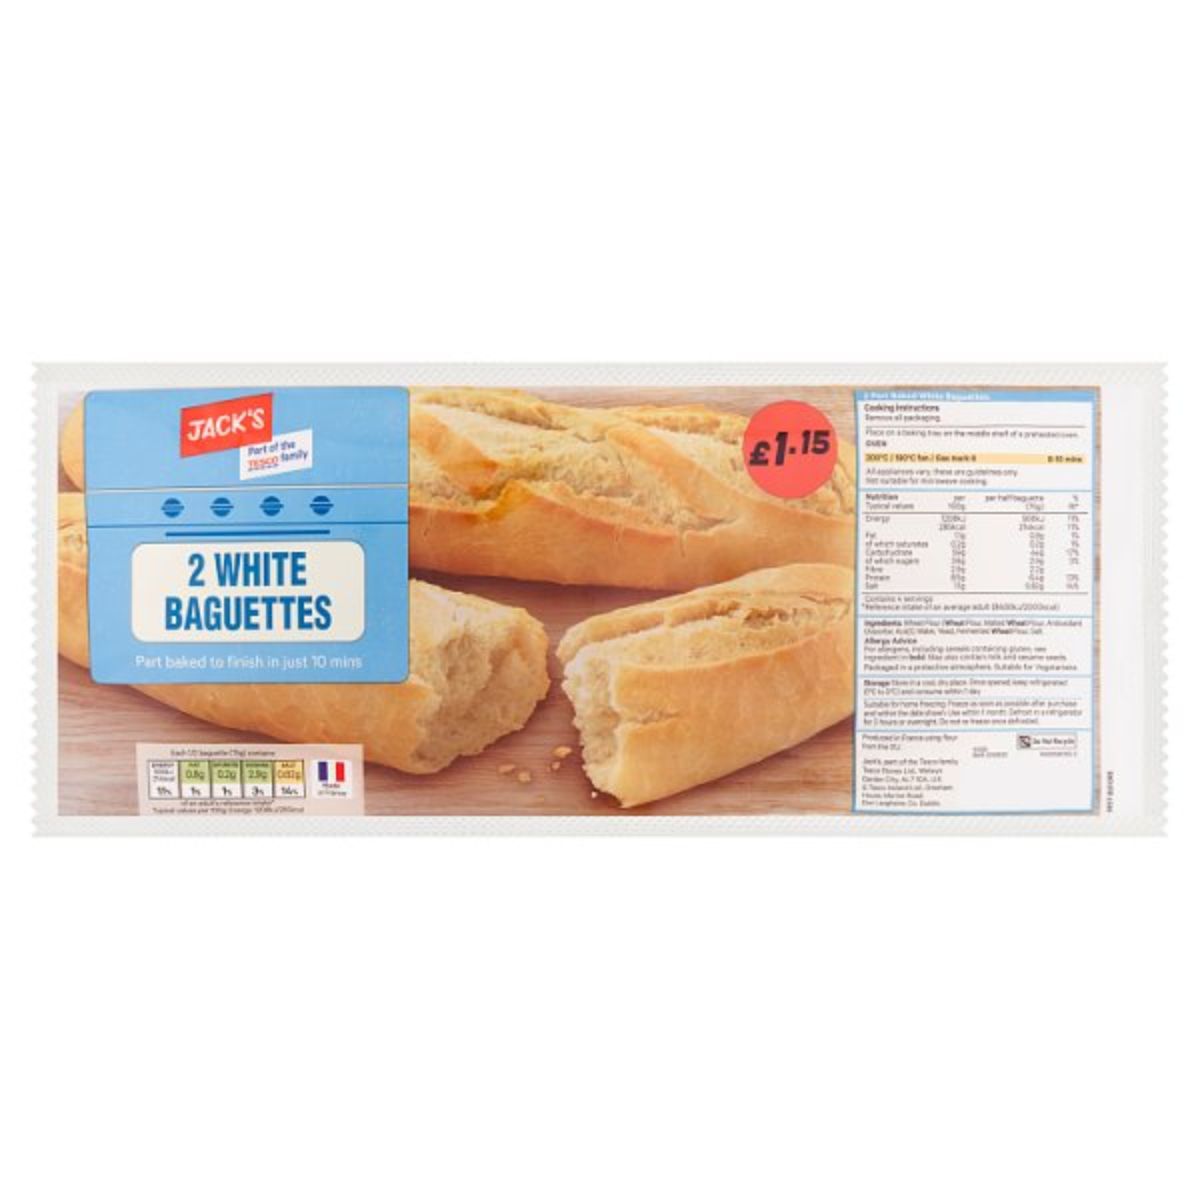 A bag of Jacks - Part Baked White Baguettes - 2 Pack with a label on it.